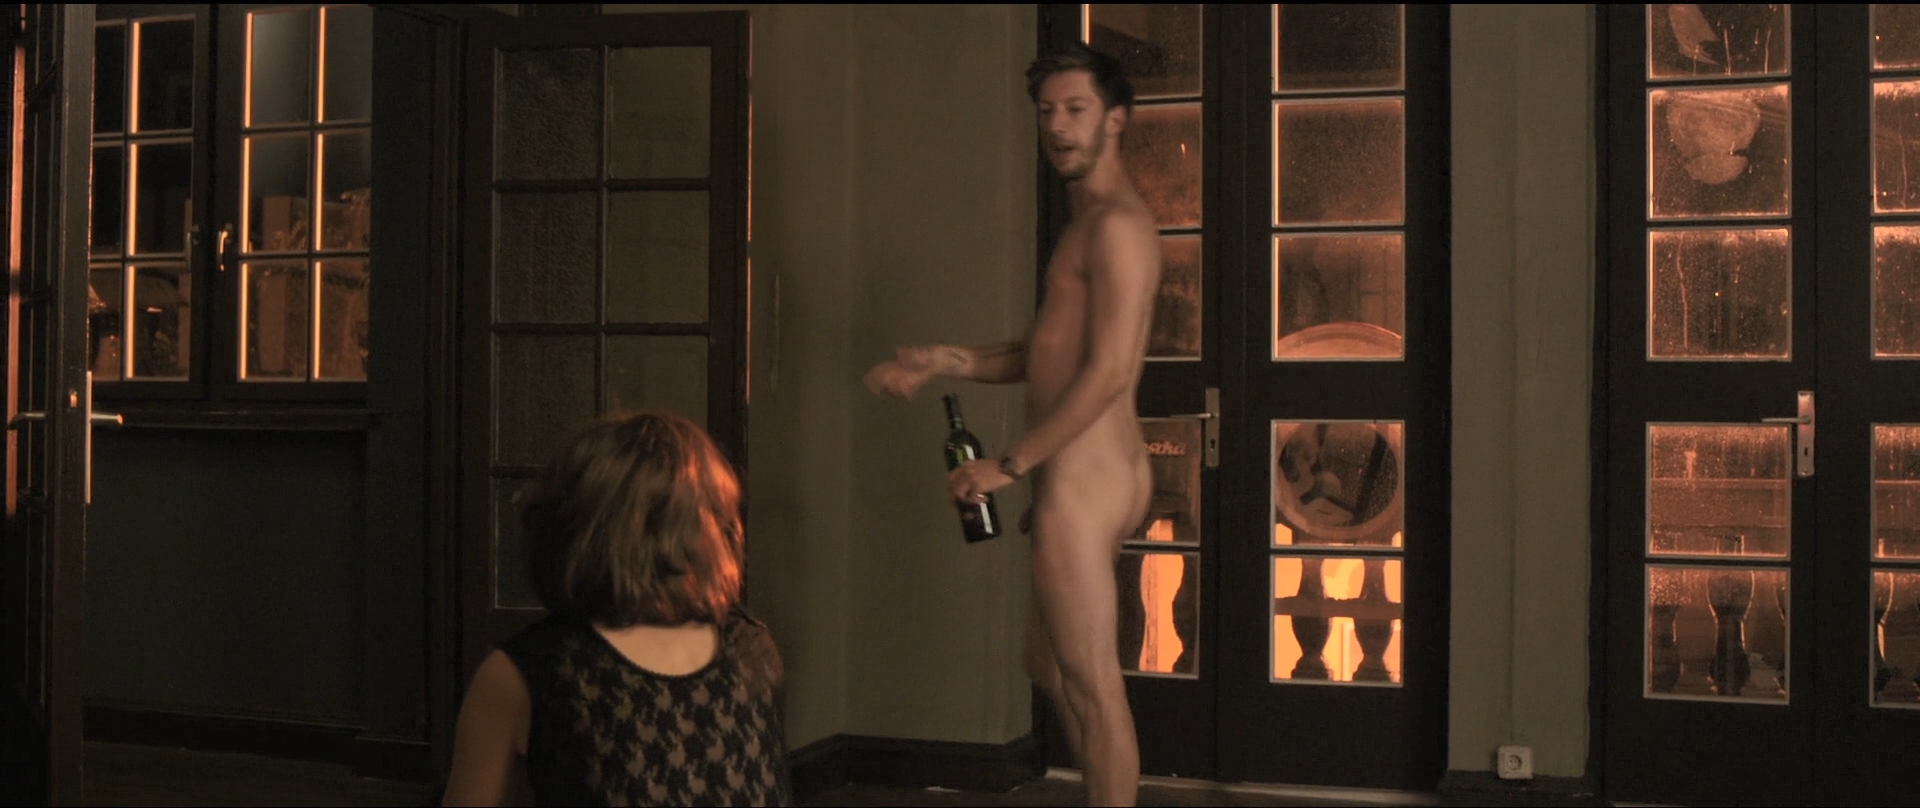 OMG, he’s naked: Max Mauff goes frontal in 'Safari - Match Me If You C...